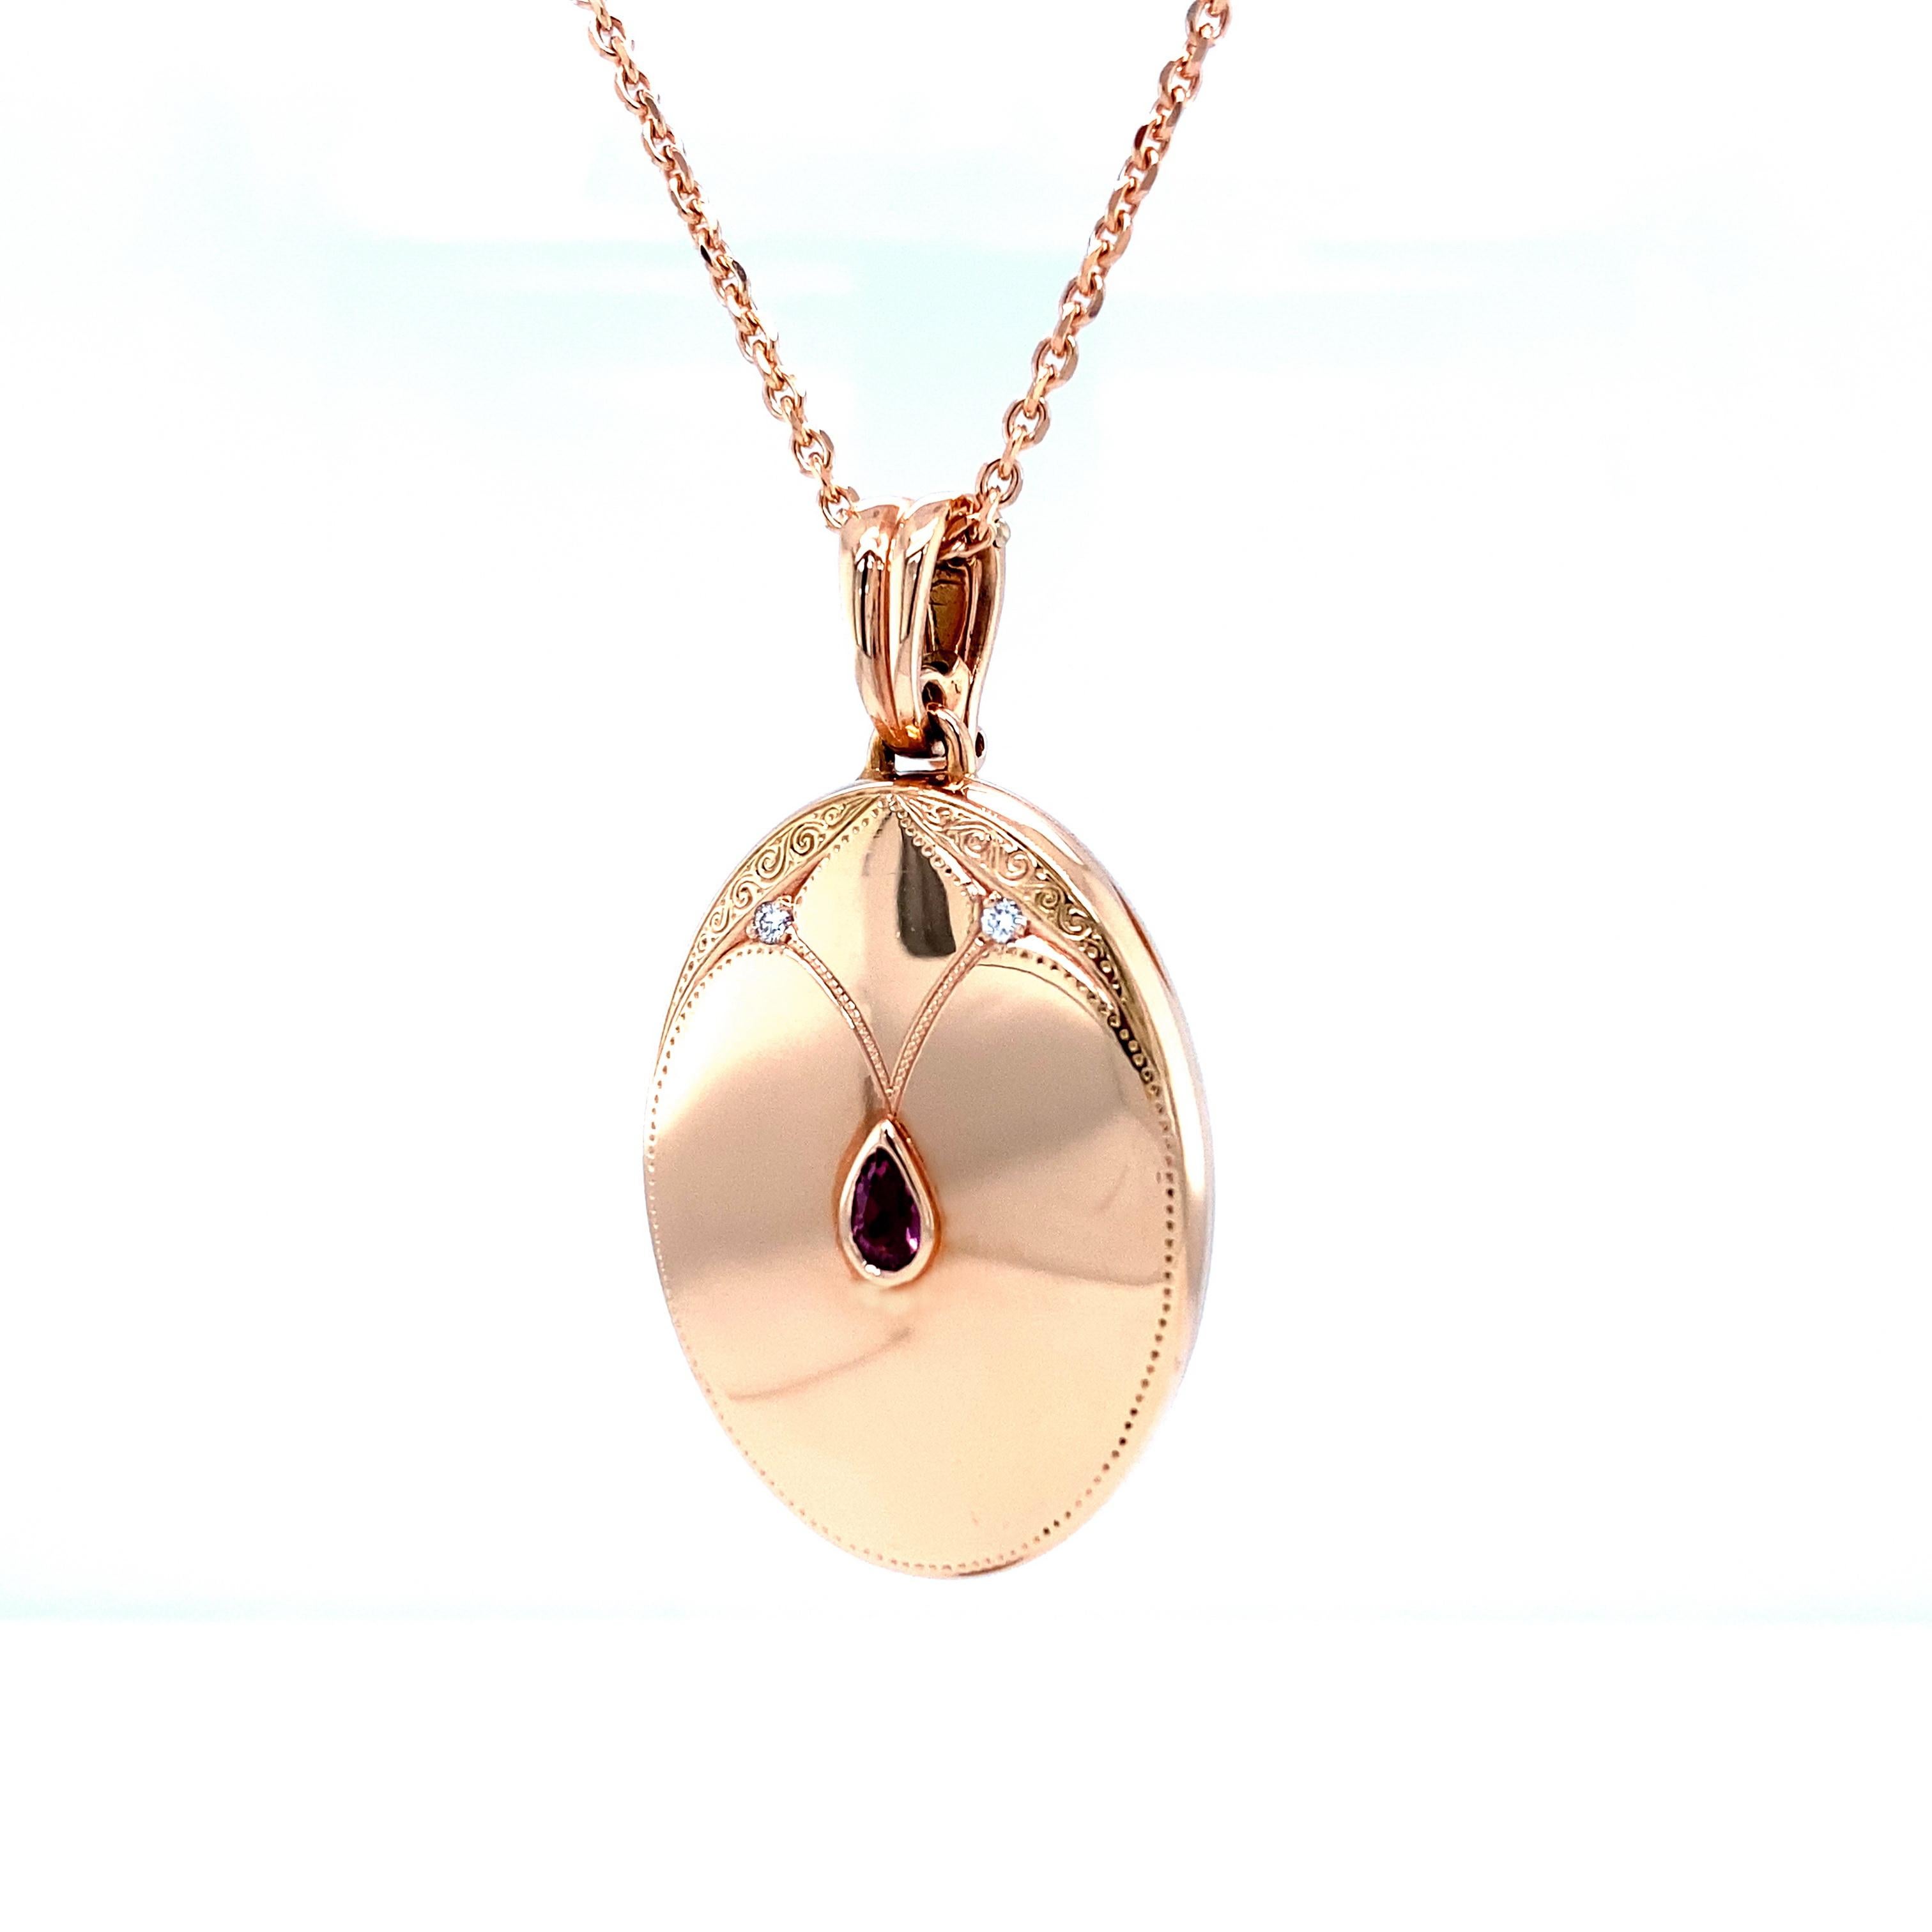 Victor Mayer oval Art Nouveau pendant locket necklace 18k rose gold, 2 diamonds, total 0.04 ct, G VS, pink pear shaped Tourmaline

About the creator Victor Mayer
Victor Mayer is internationally renowned for elegant timeless designs and unrivalled